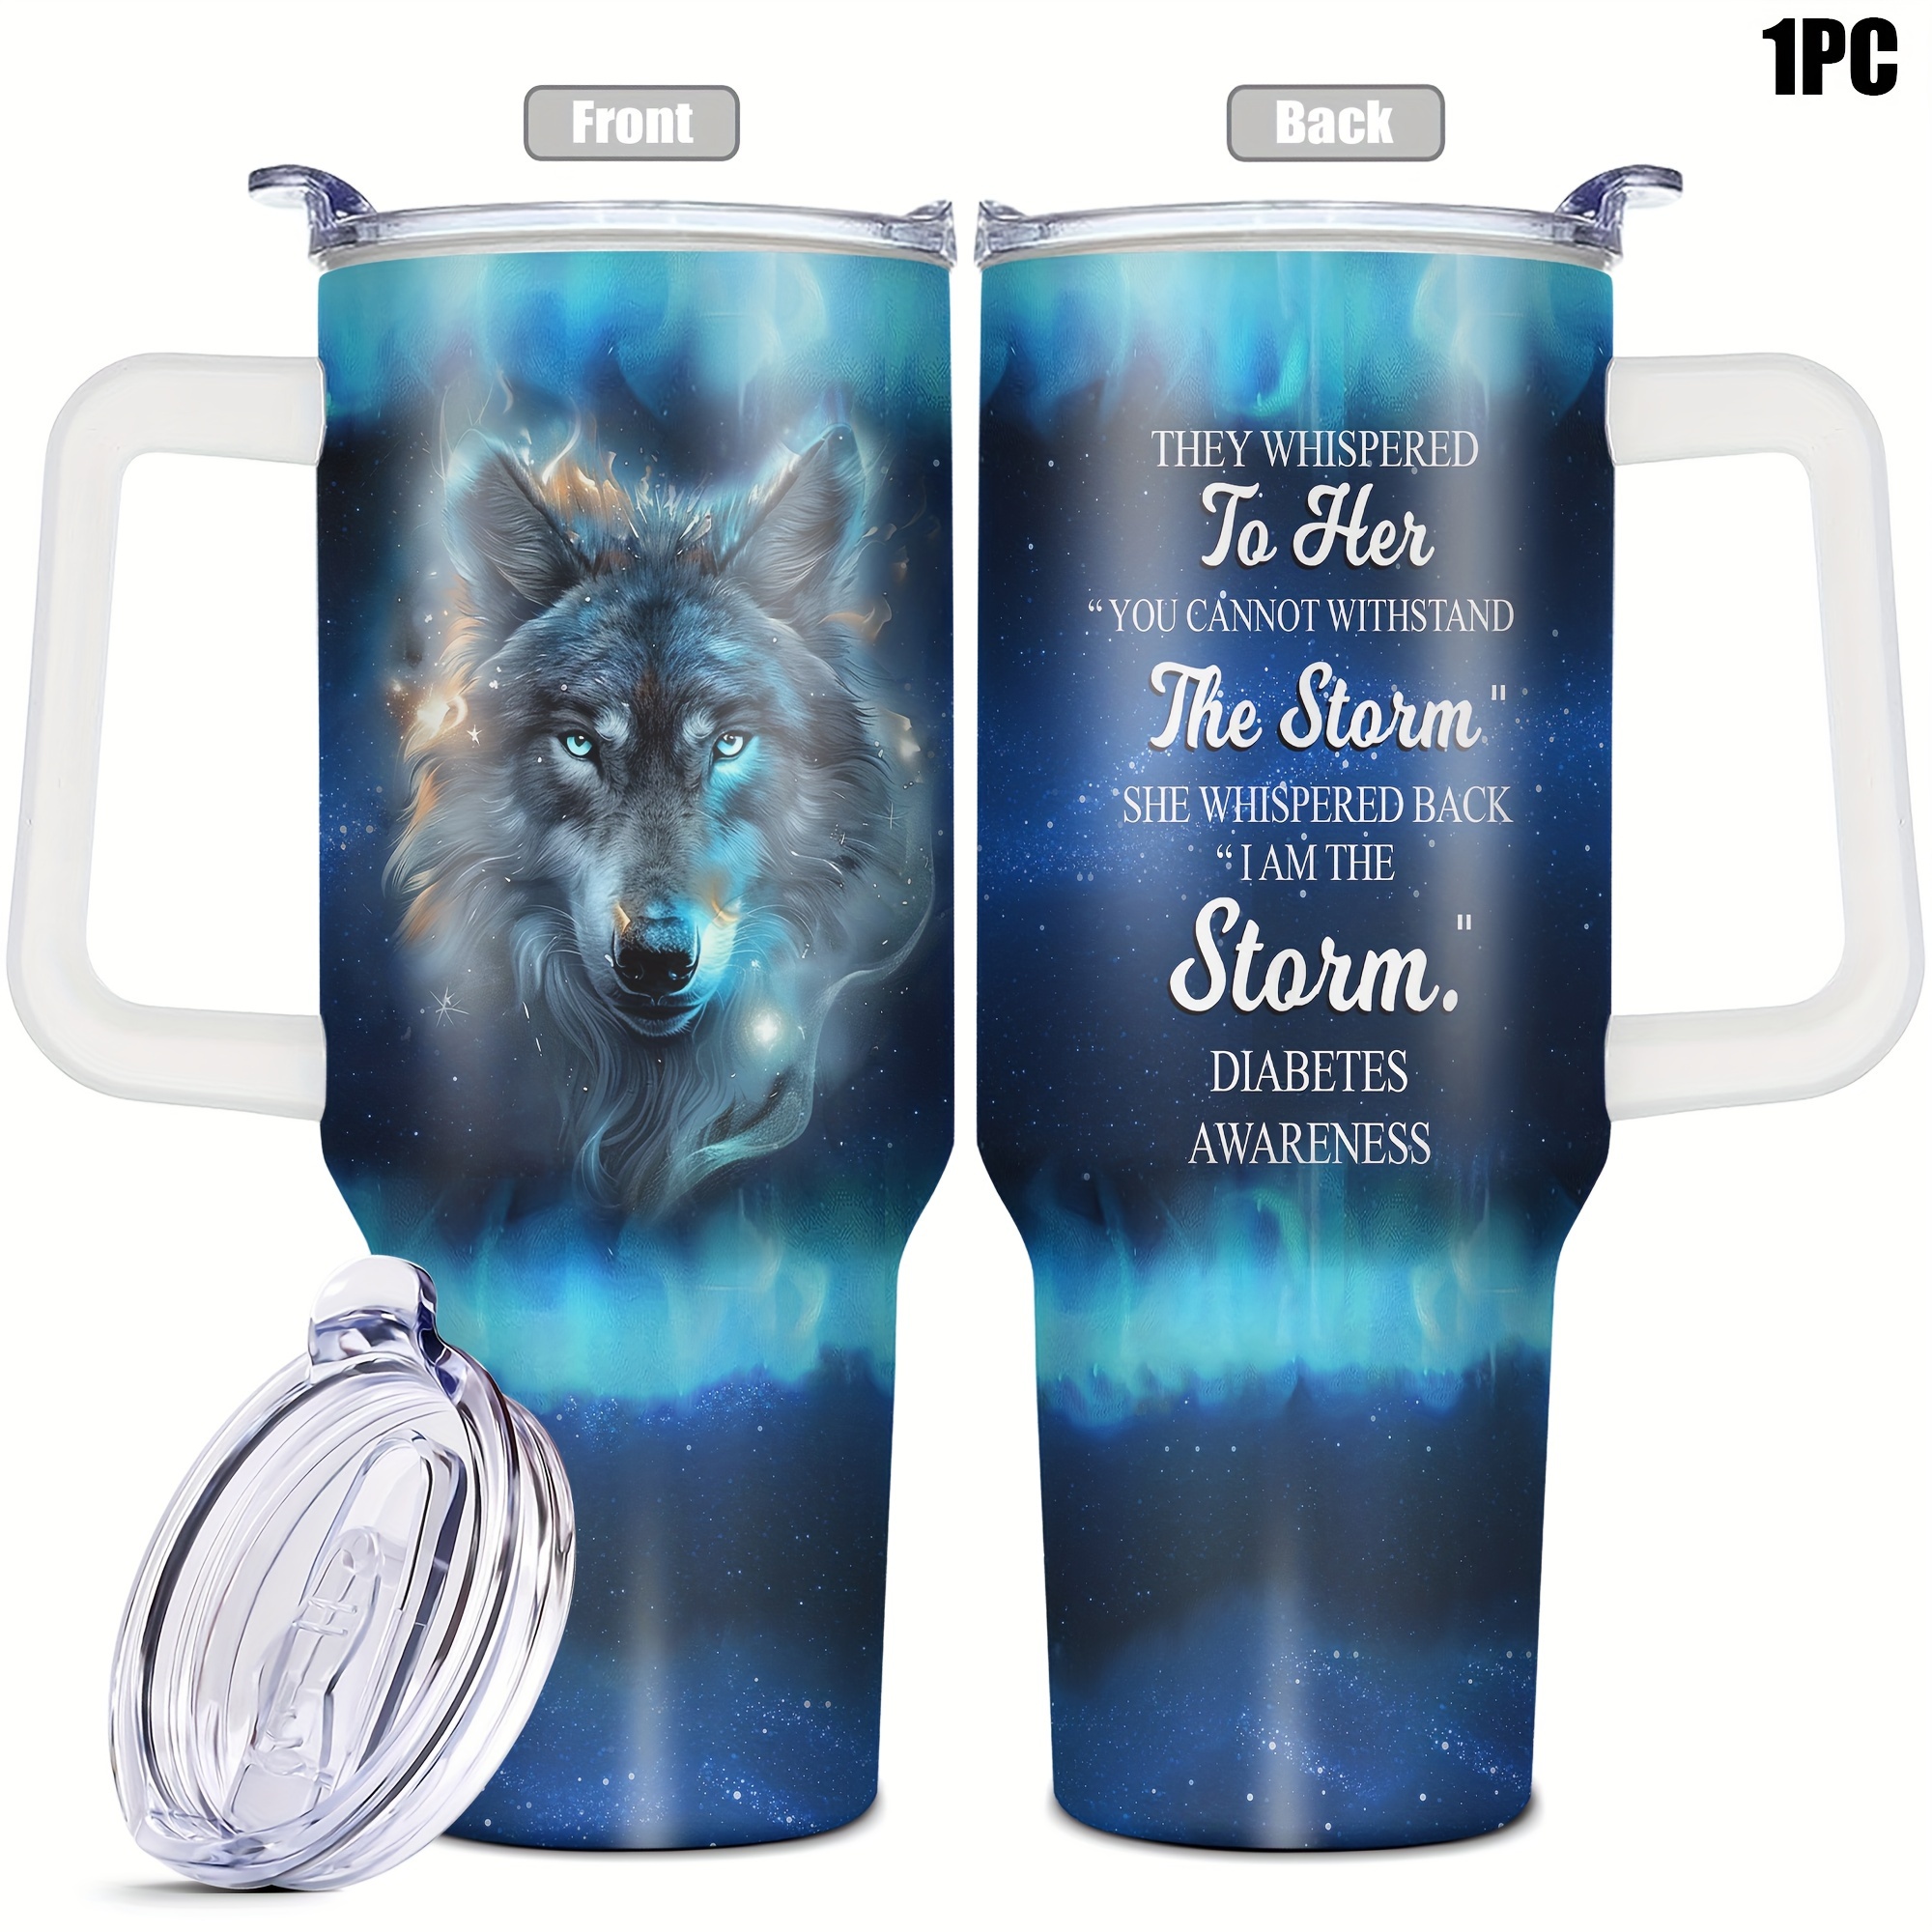 

Aurora Wolf 40oz Insulated Tumbler - Bpa-free, Reusable Travel Mug With Lid For Hot & Cold Drinks - Perfect Gift For Women, Mom, Sisters, Teachers, Coworkers On Christmas, Birthdays, Graduations